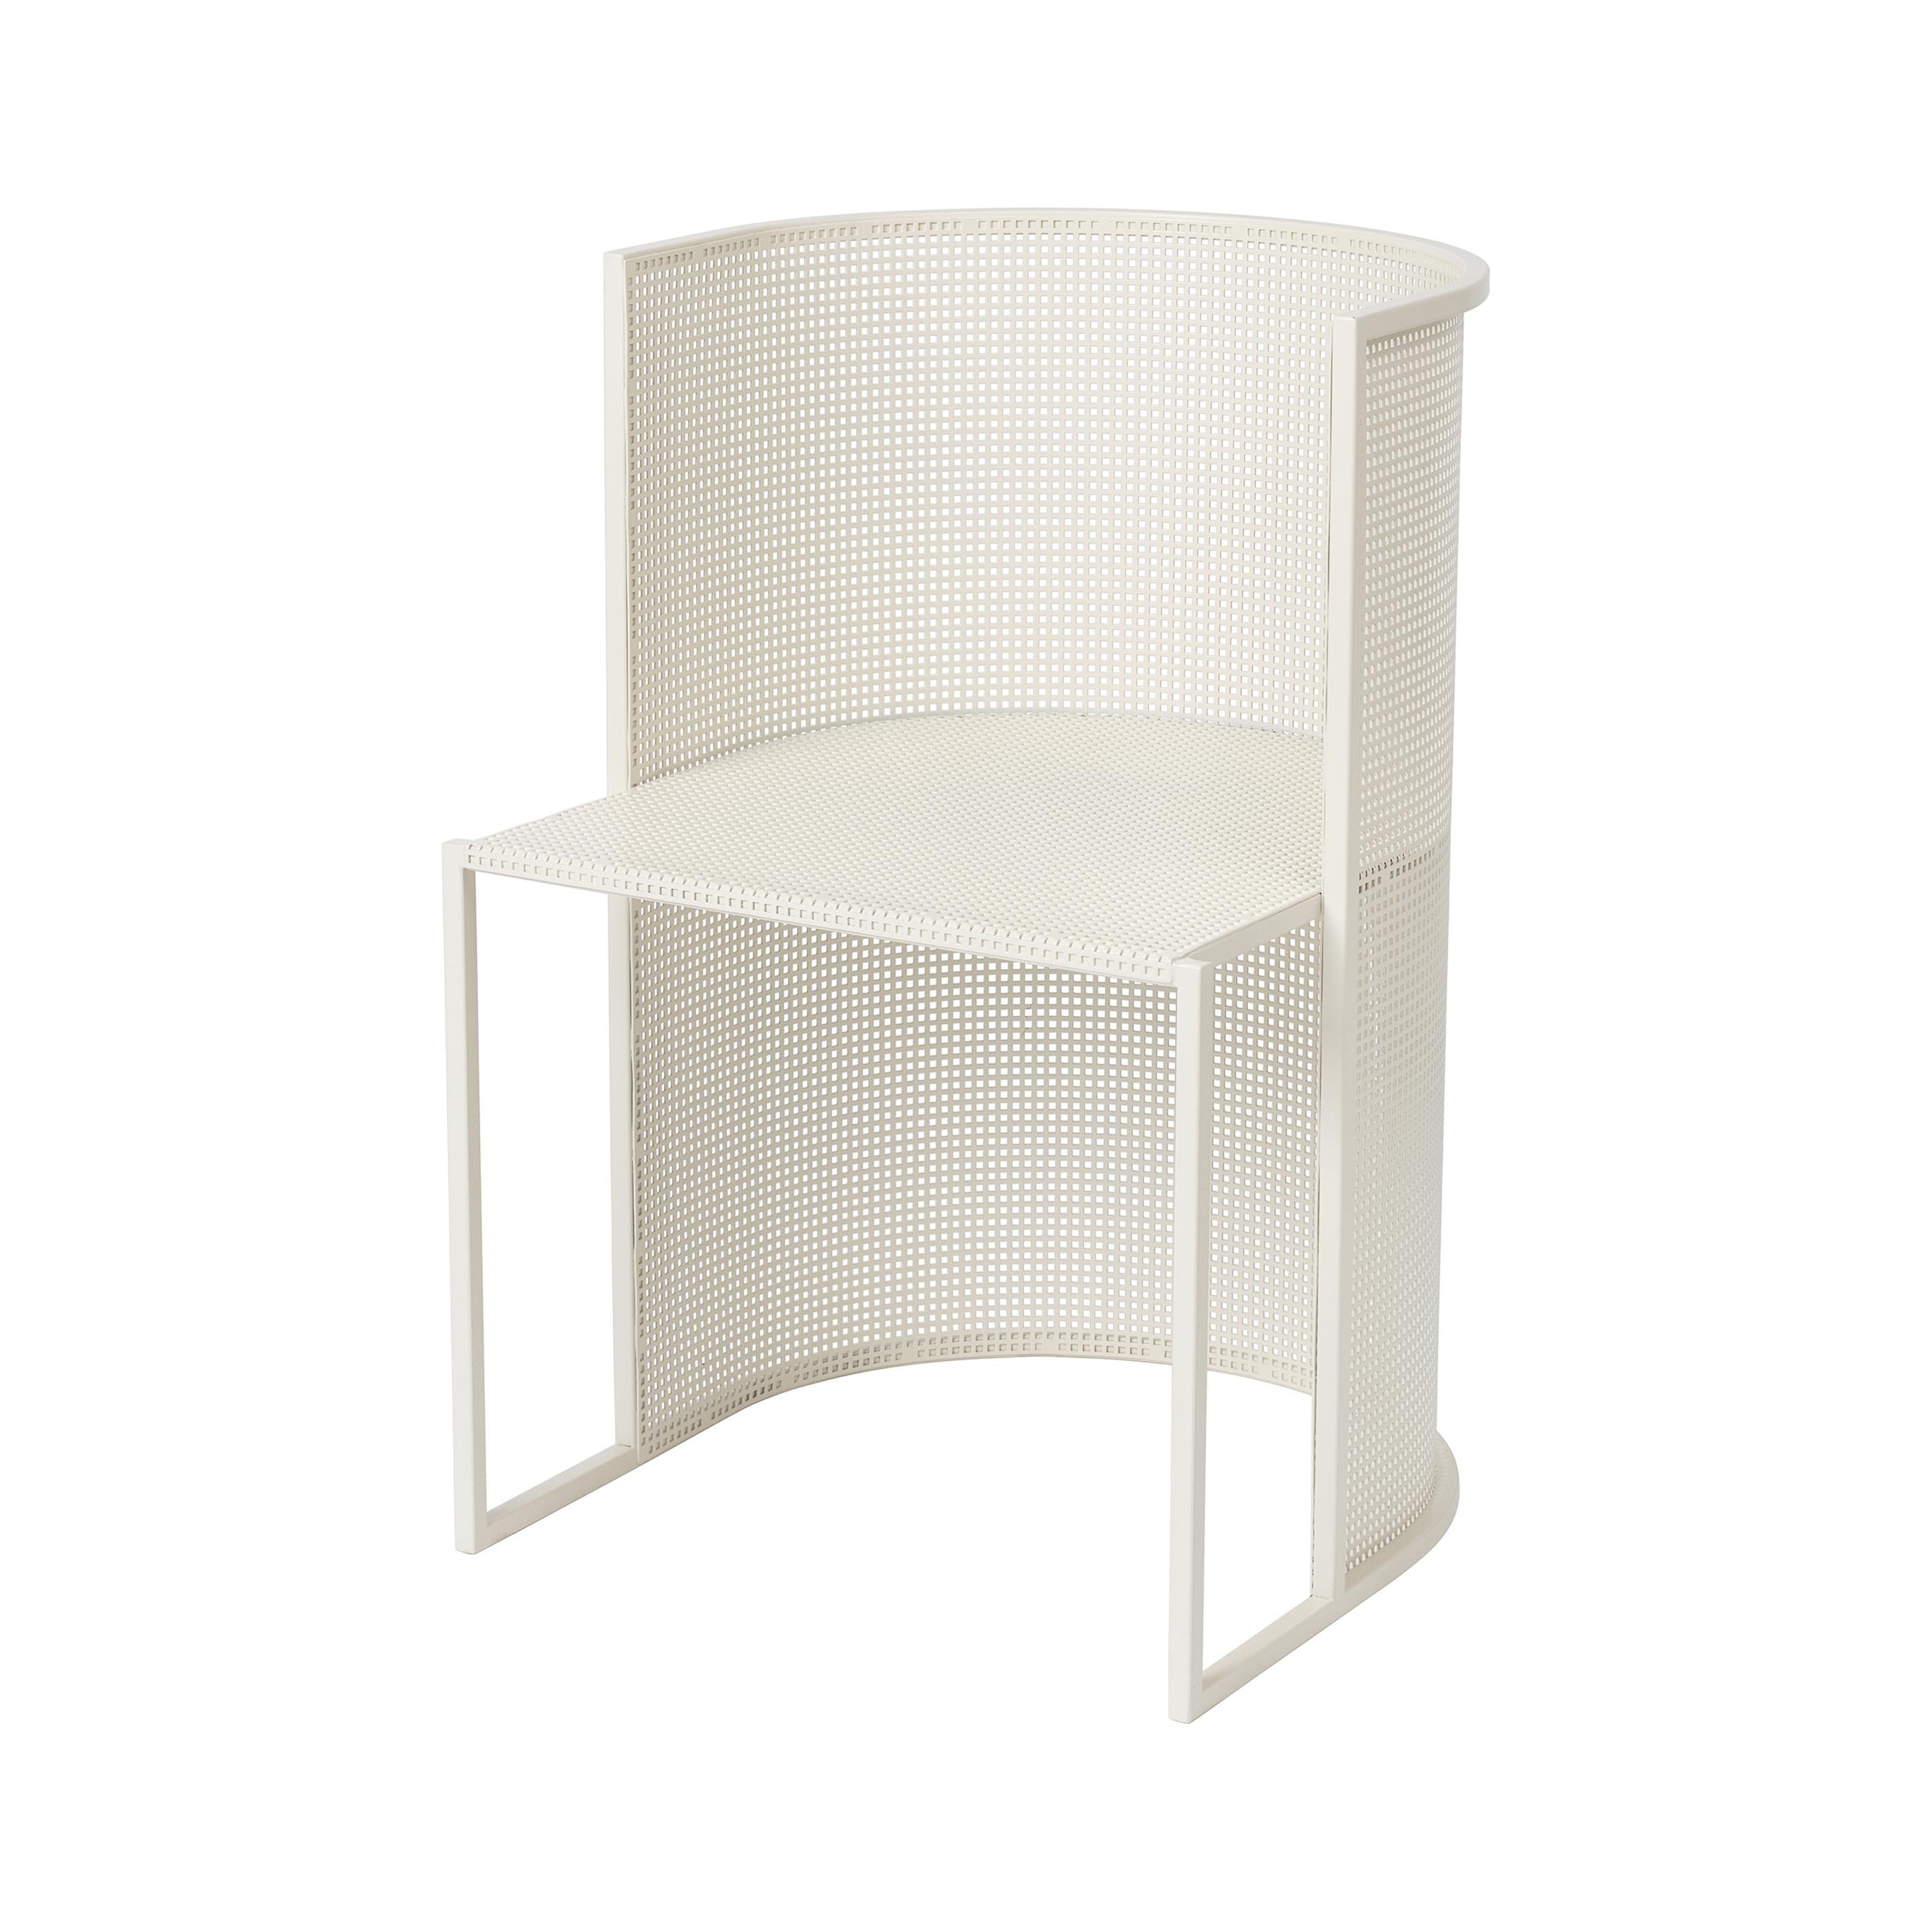 Steel Bahaus dining chair by Kristina Dam Studio
Materials: Beige outdoor powder-coated steel
Dimensions: 77 x 53 x 51 cm

Dimensions cannot be customized.

*Safe to use outdoor.

Kristina Dam graduated from The Royal Danish School of Fine Arts,